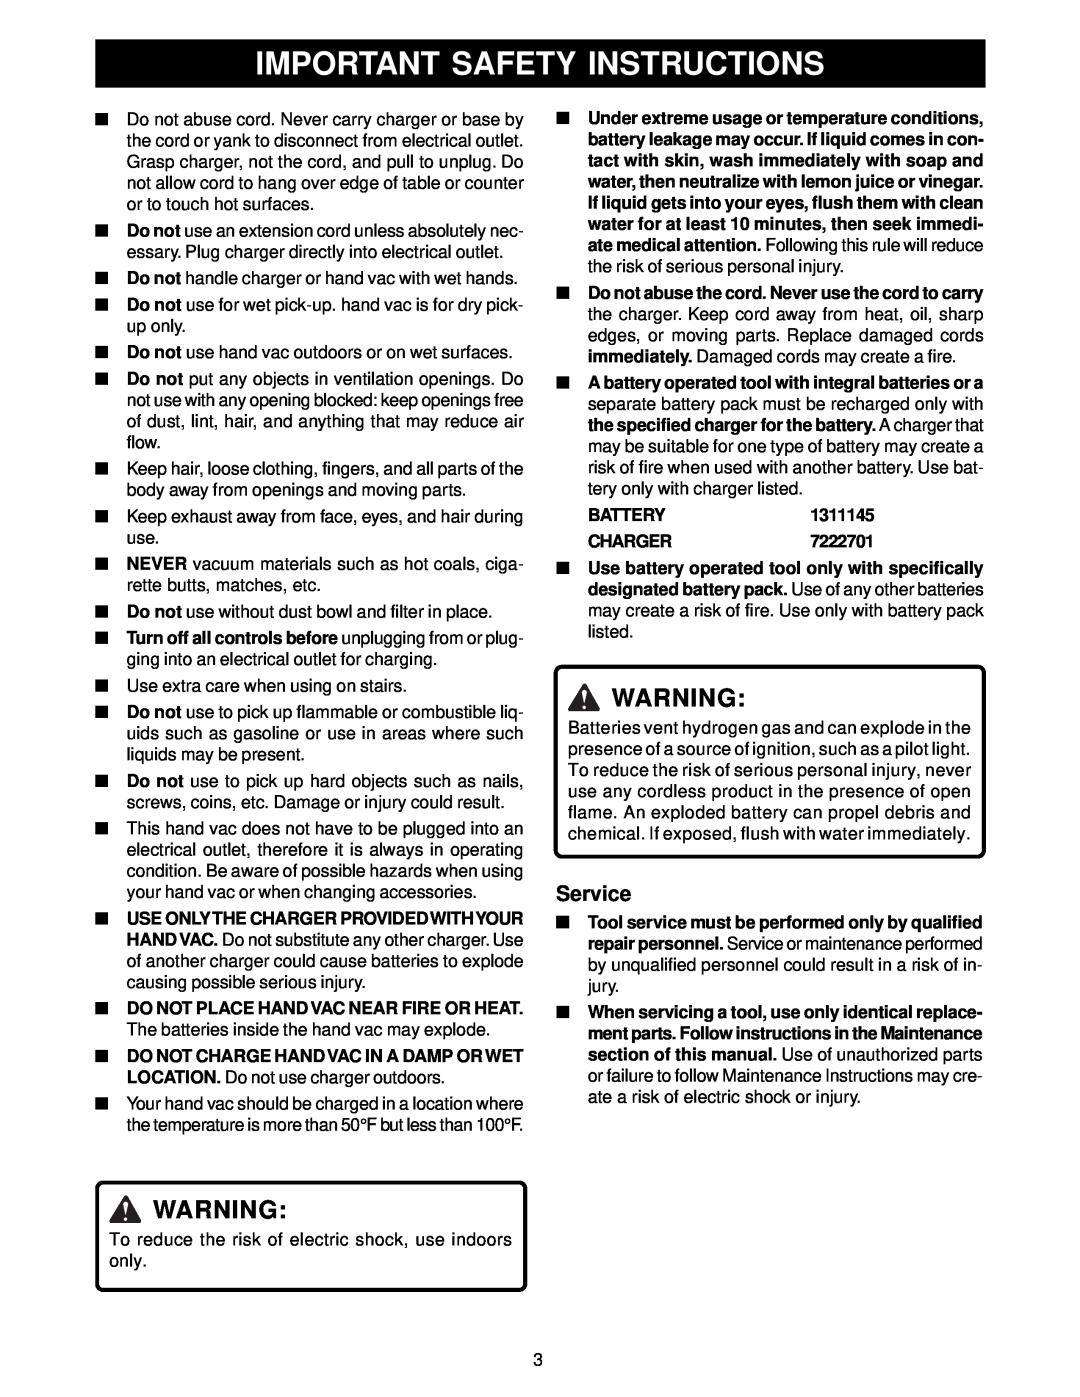 Ryobi VC722 manual Important Safety Instructions, Service, BATTERY1311145 CHARGER7222701 